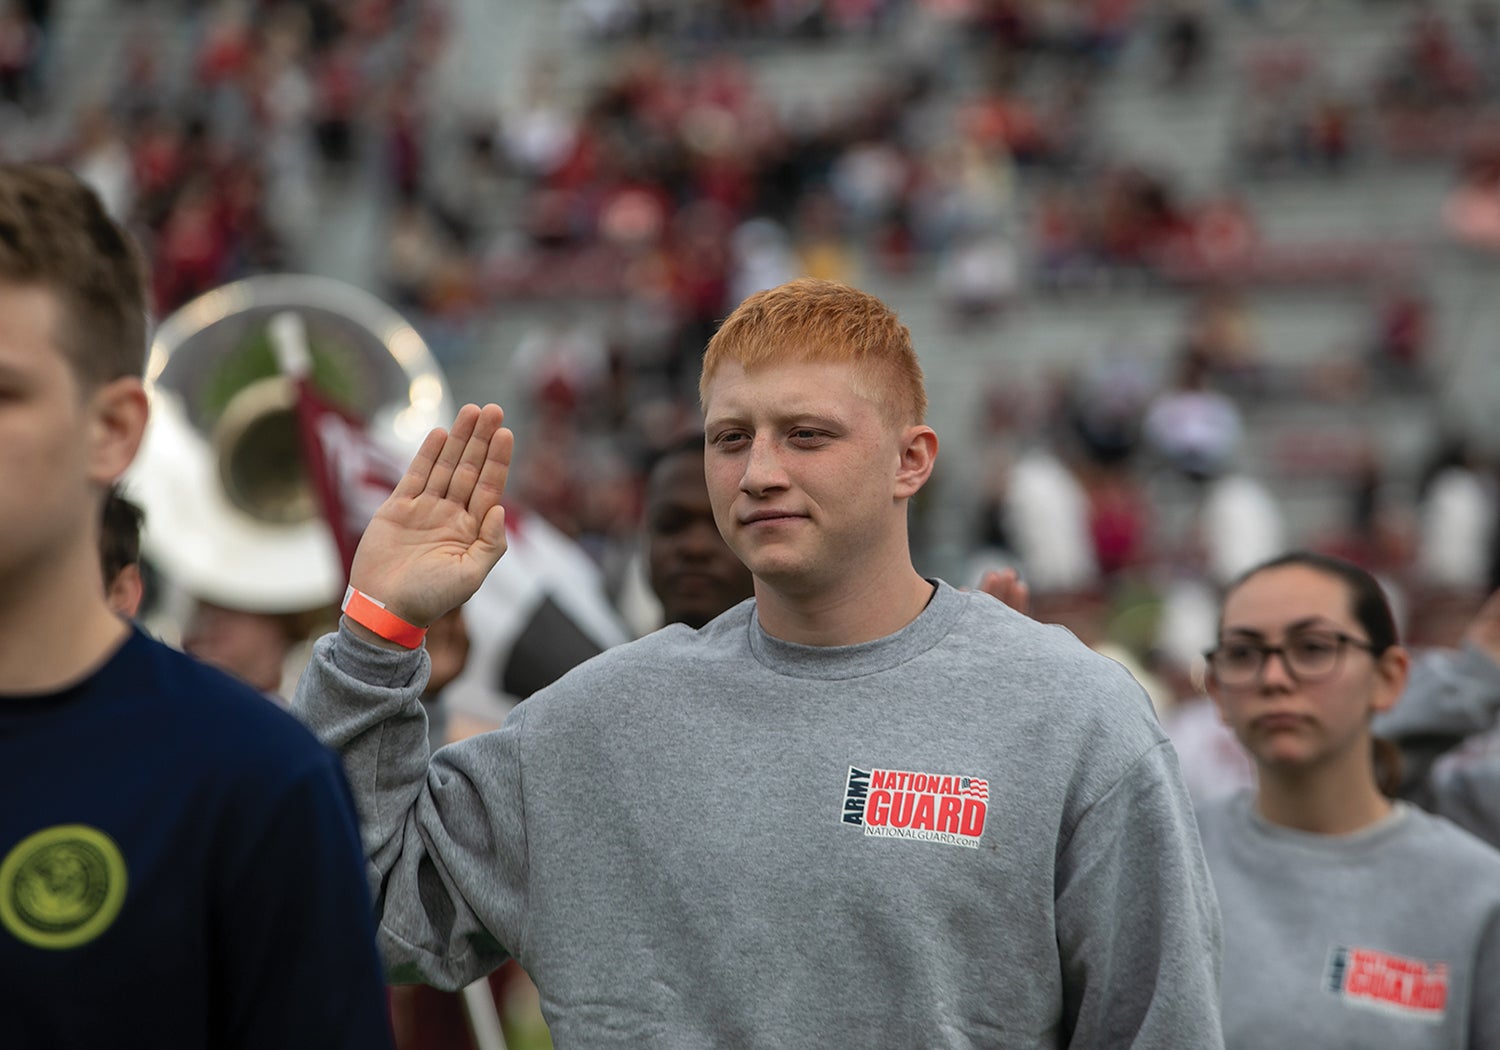 Florida Army National Guard recruits take the oath of enlistment before a football game at Florida State University’s Doak Campbell Stadium. (Credit: Florida National Guard/Sgt. Spencer Rhodes)